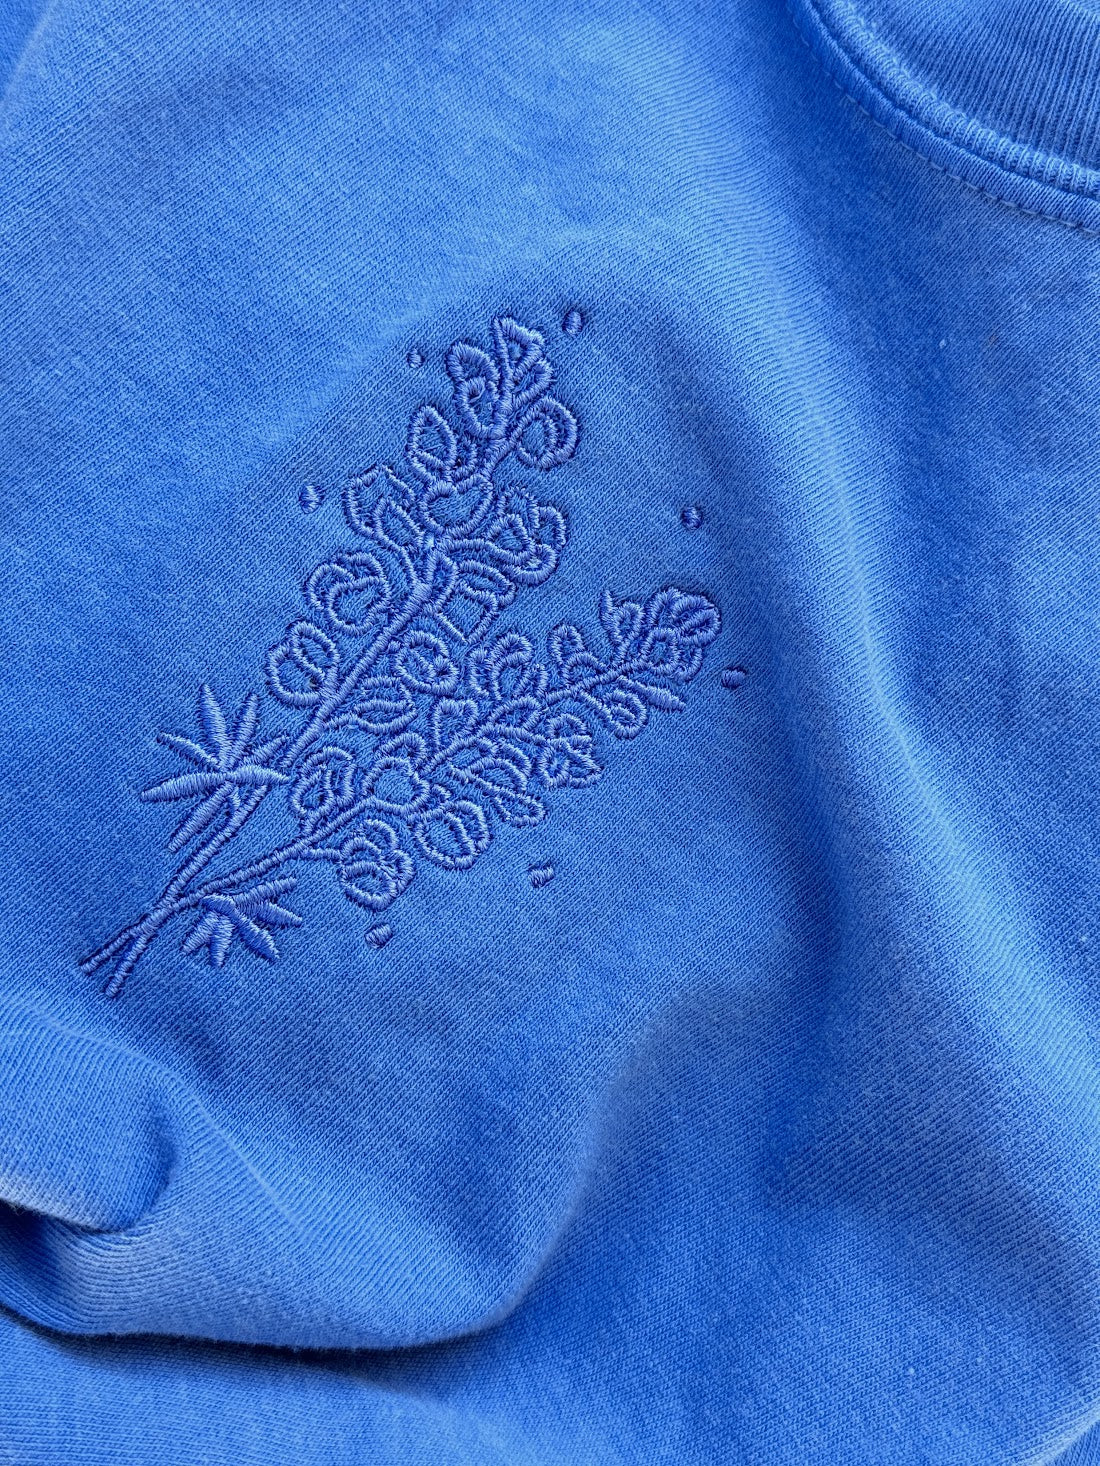 Bluebonnet Embroidered Tee